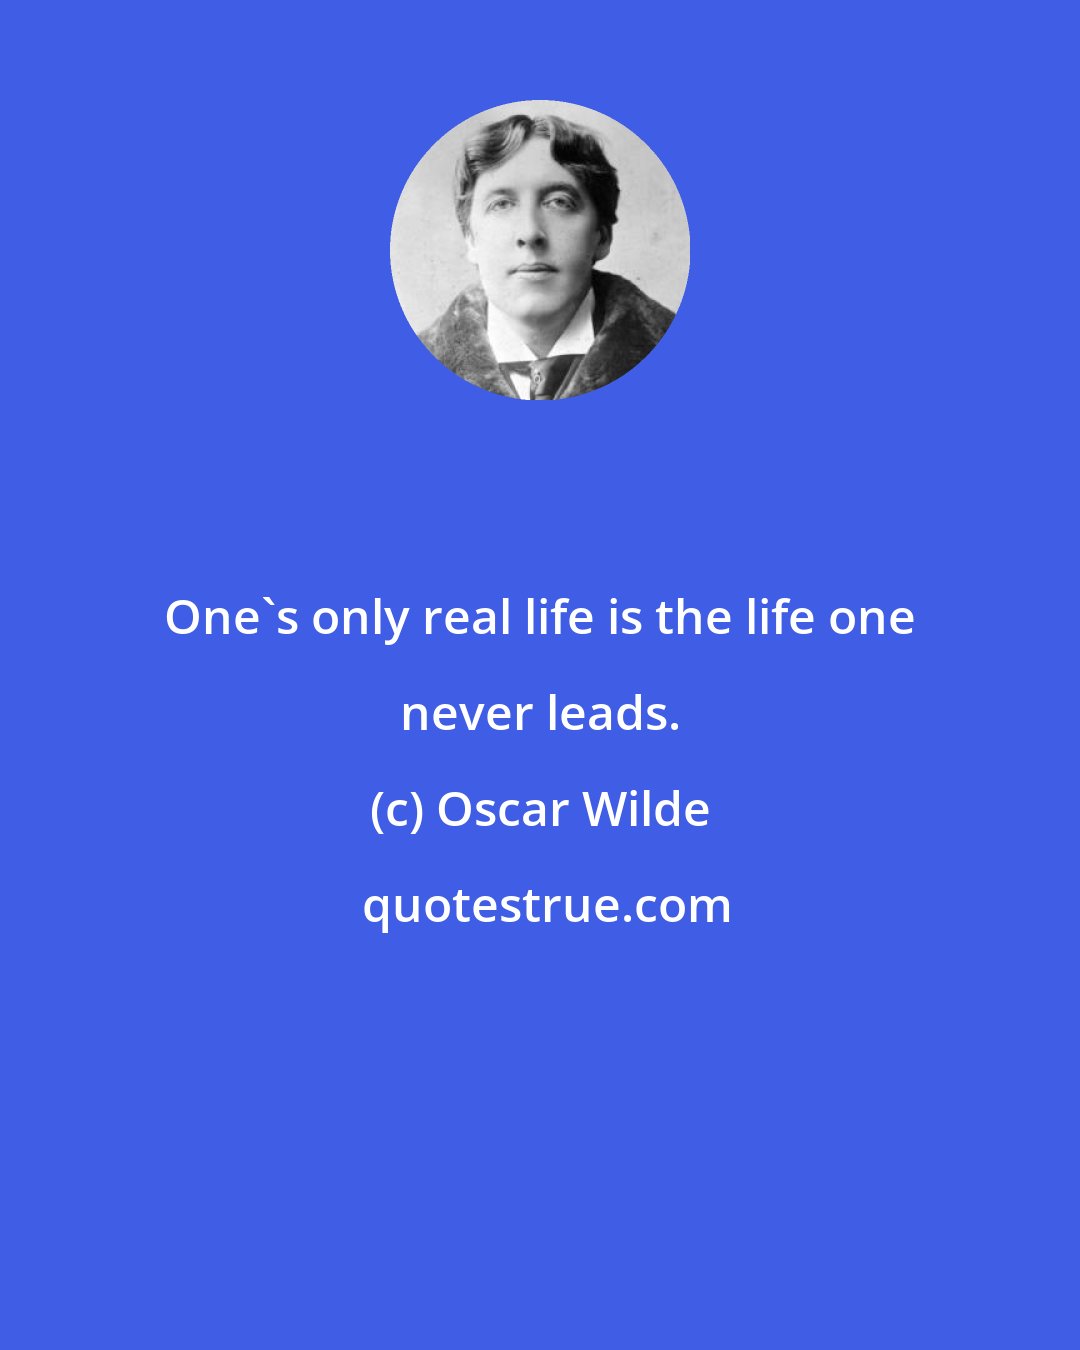 Oscar Wilde: One's only real life is the life one never leads.